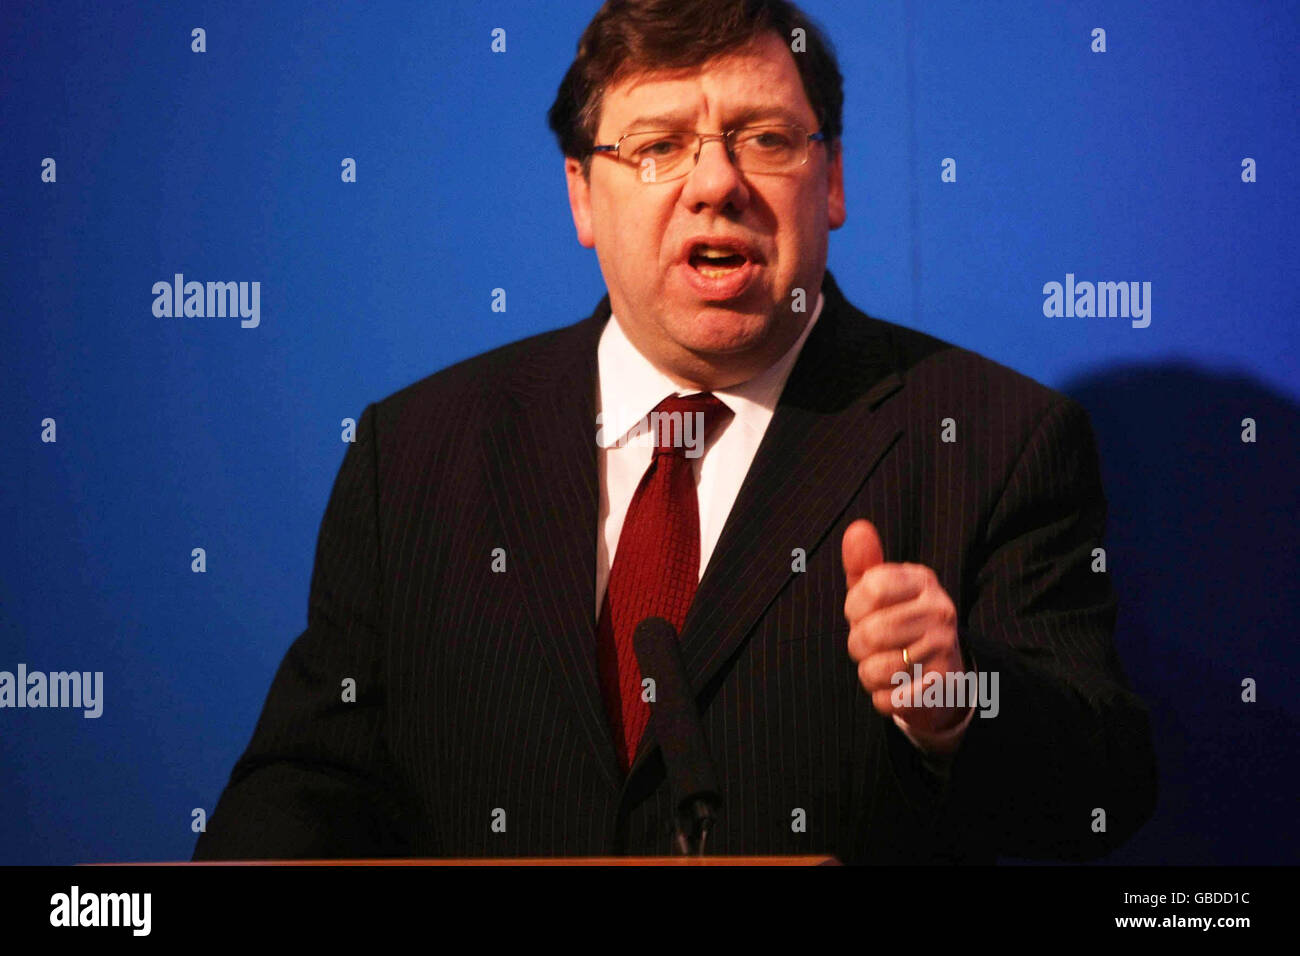 Taoiseach Brian Cowen at a press conference in the Government Buildings, Dublin. Stock Photo